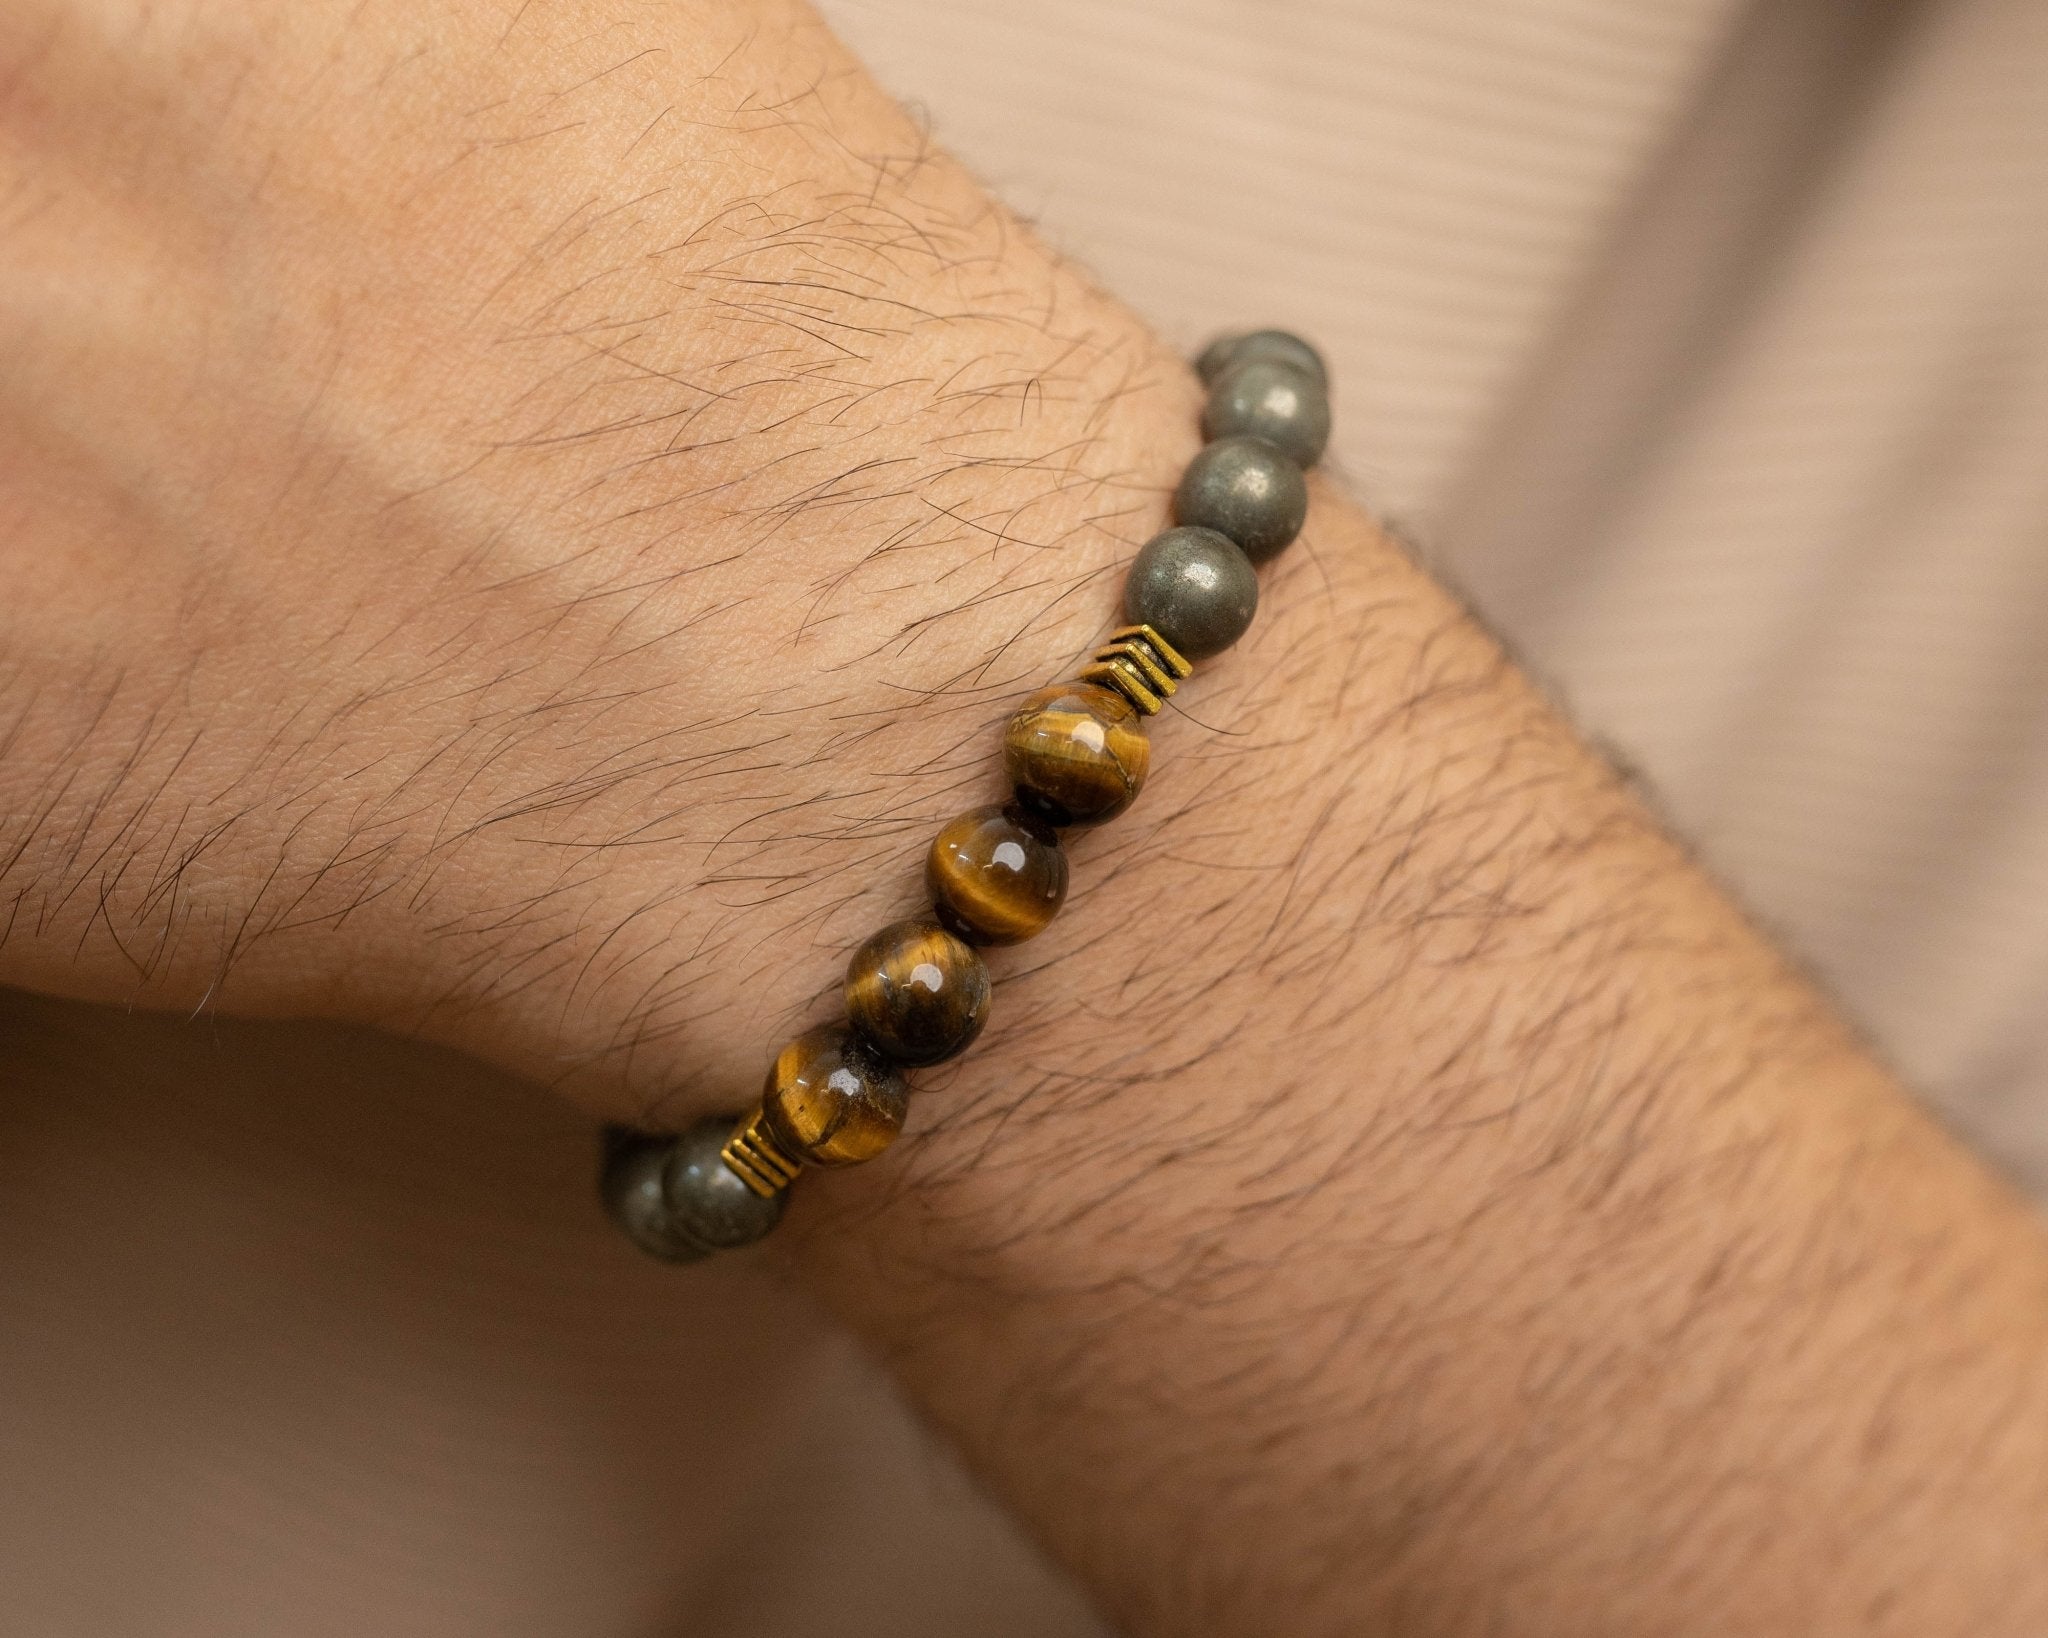 Tiger's Eye & Iron Pyrite with Golden Charm Bracelet - Bodh Gem and Crystals